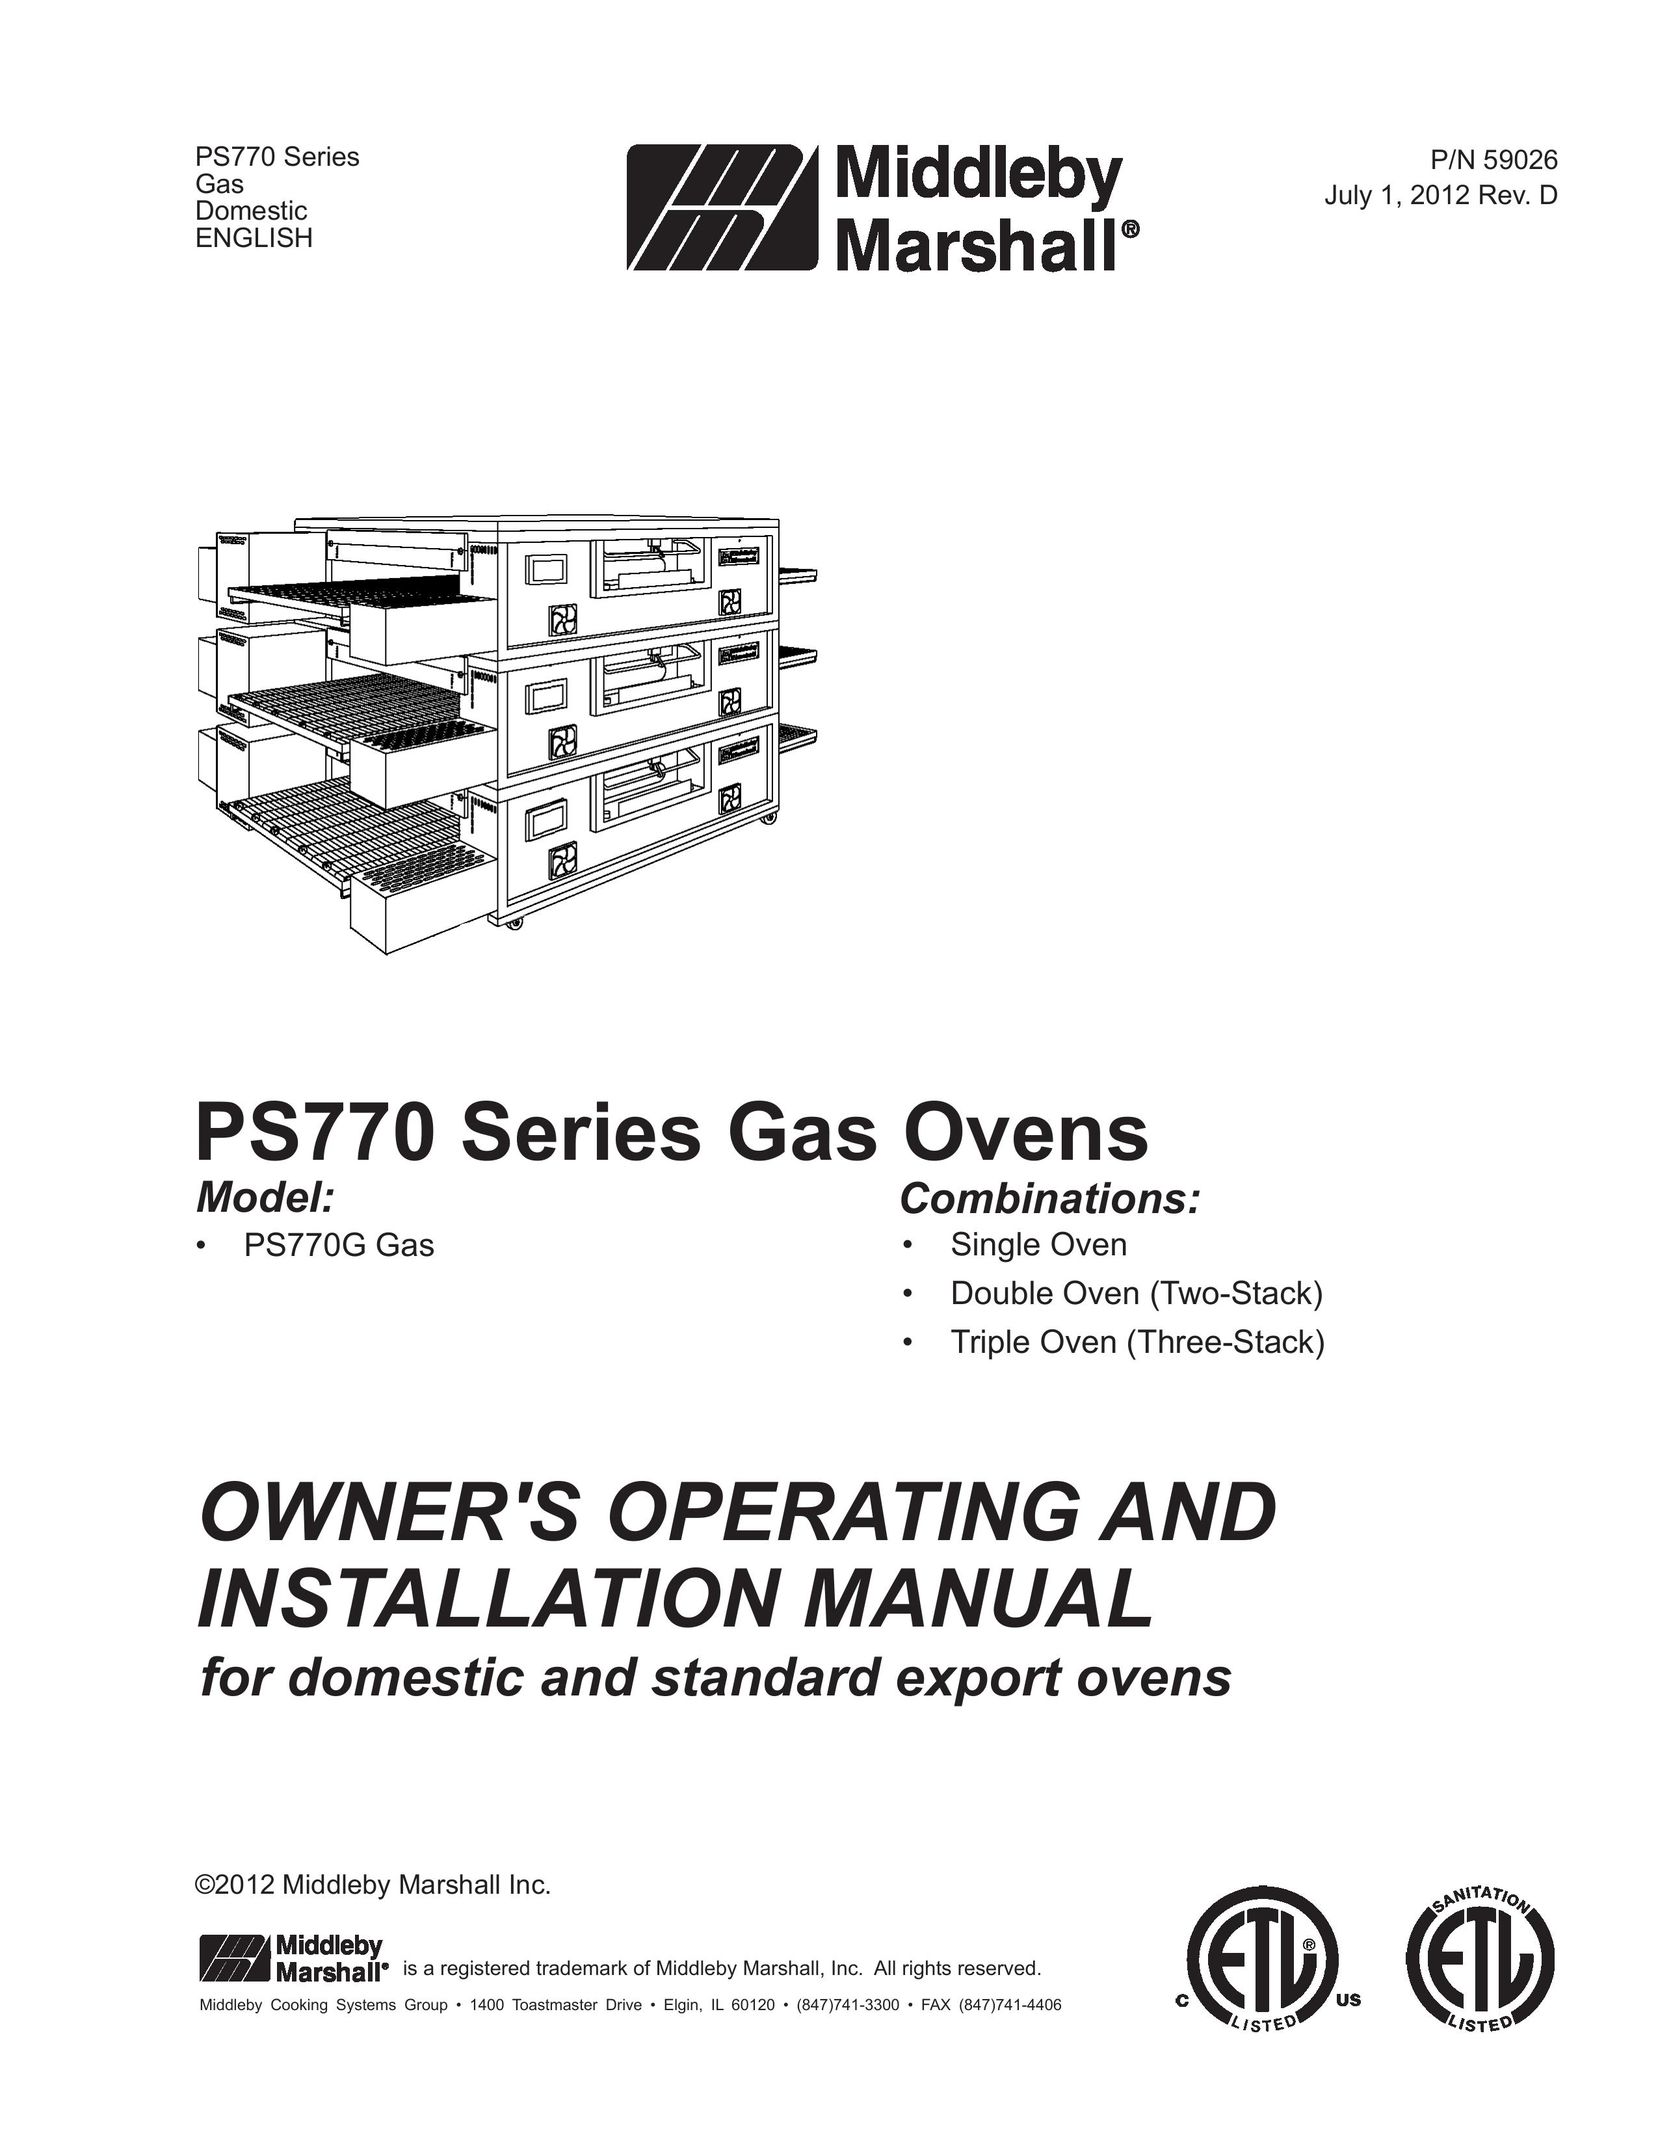 Middleby Cooking Systems Group PS770 Oven User Manual